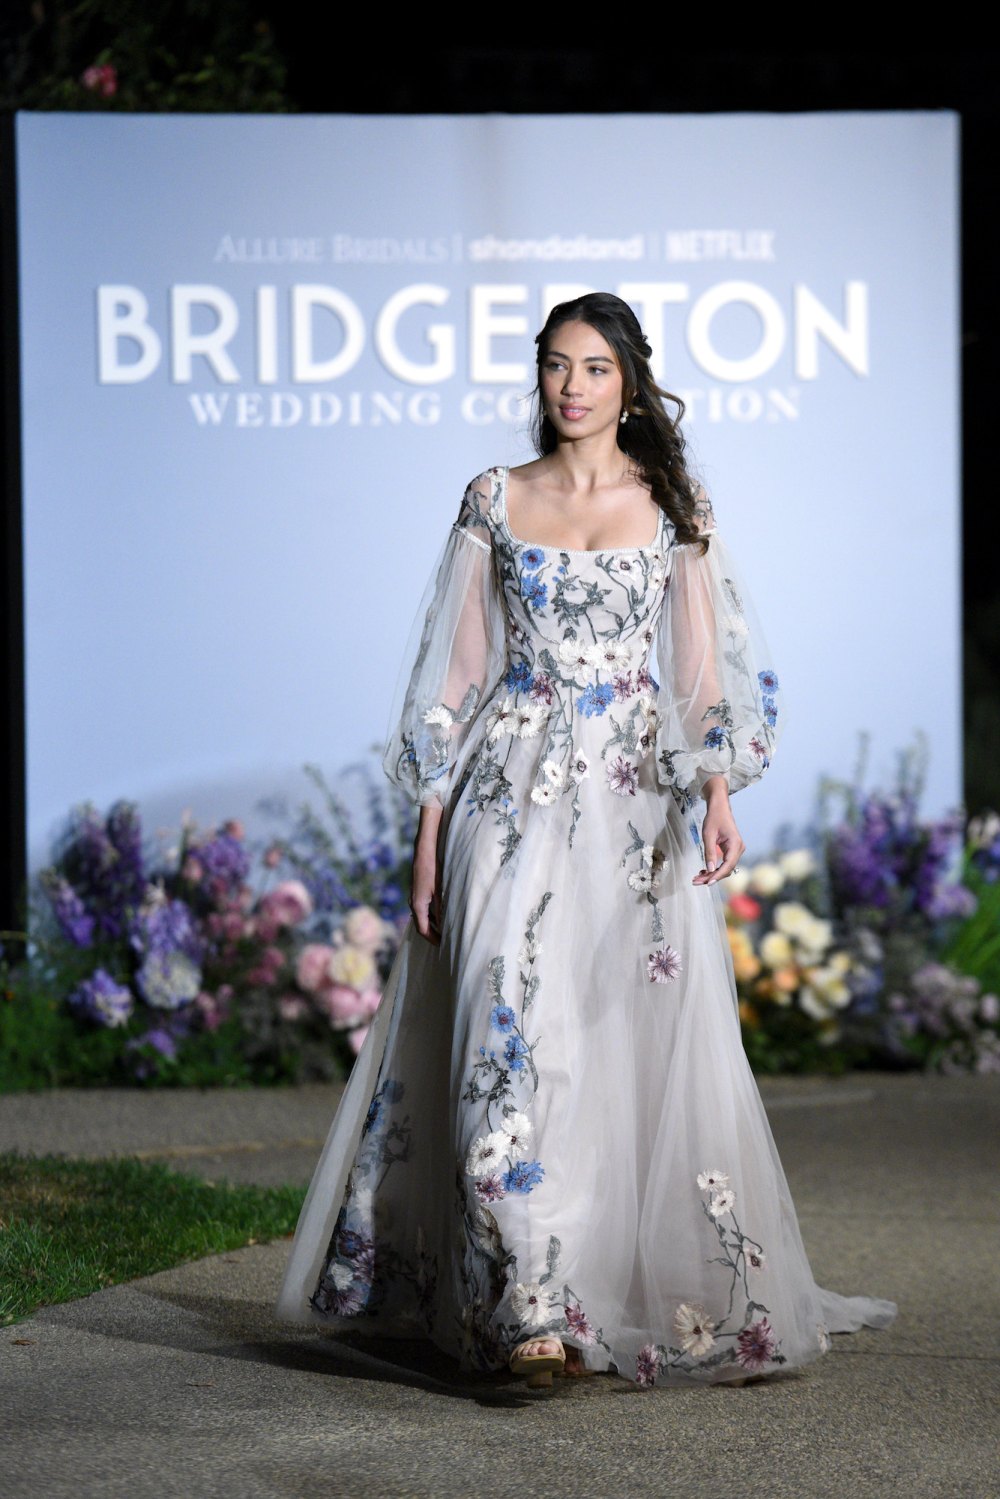 Netflix's Bridgerton comes to life in Allure Bridal's wedding dress collection